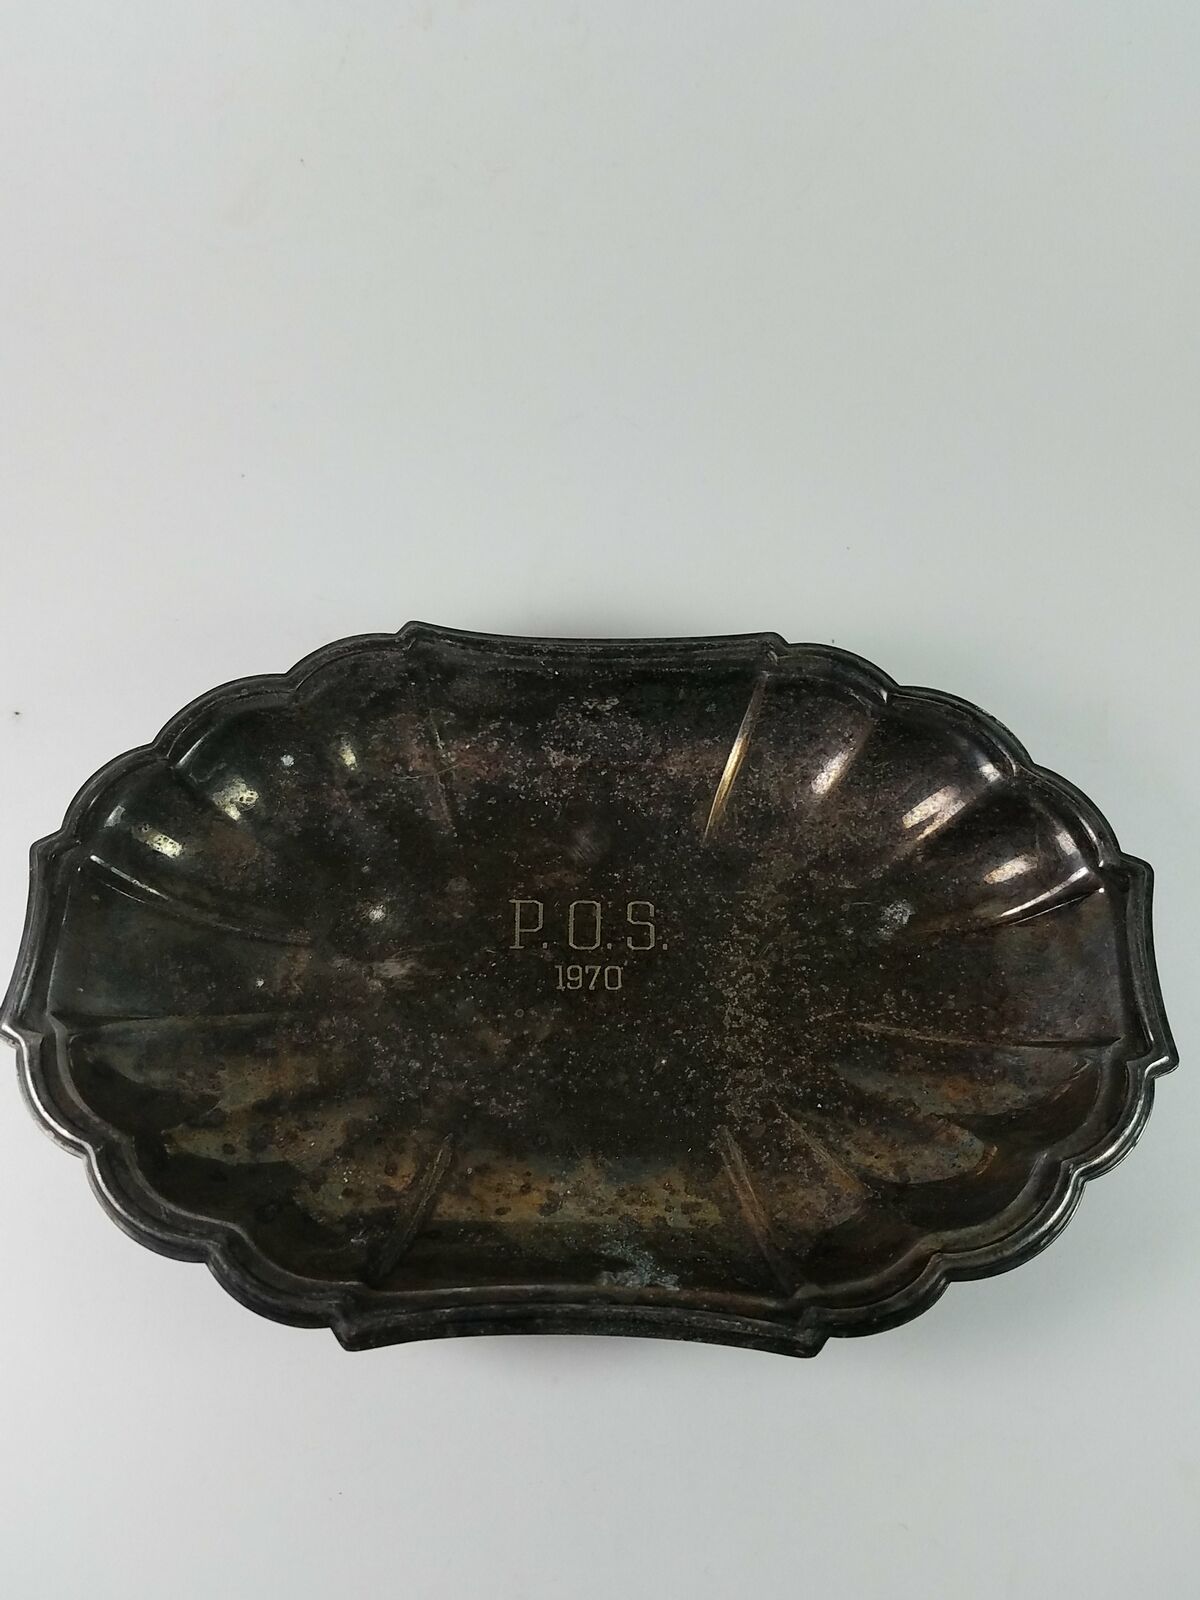 Vintage P.O.S. 1970 Serving Tray